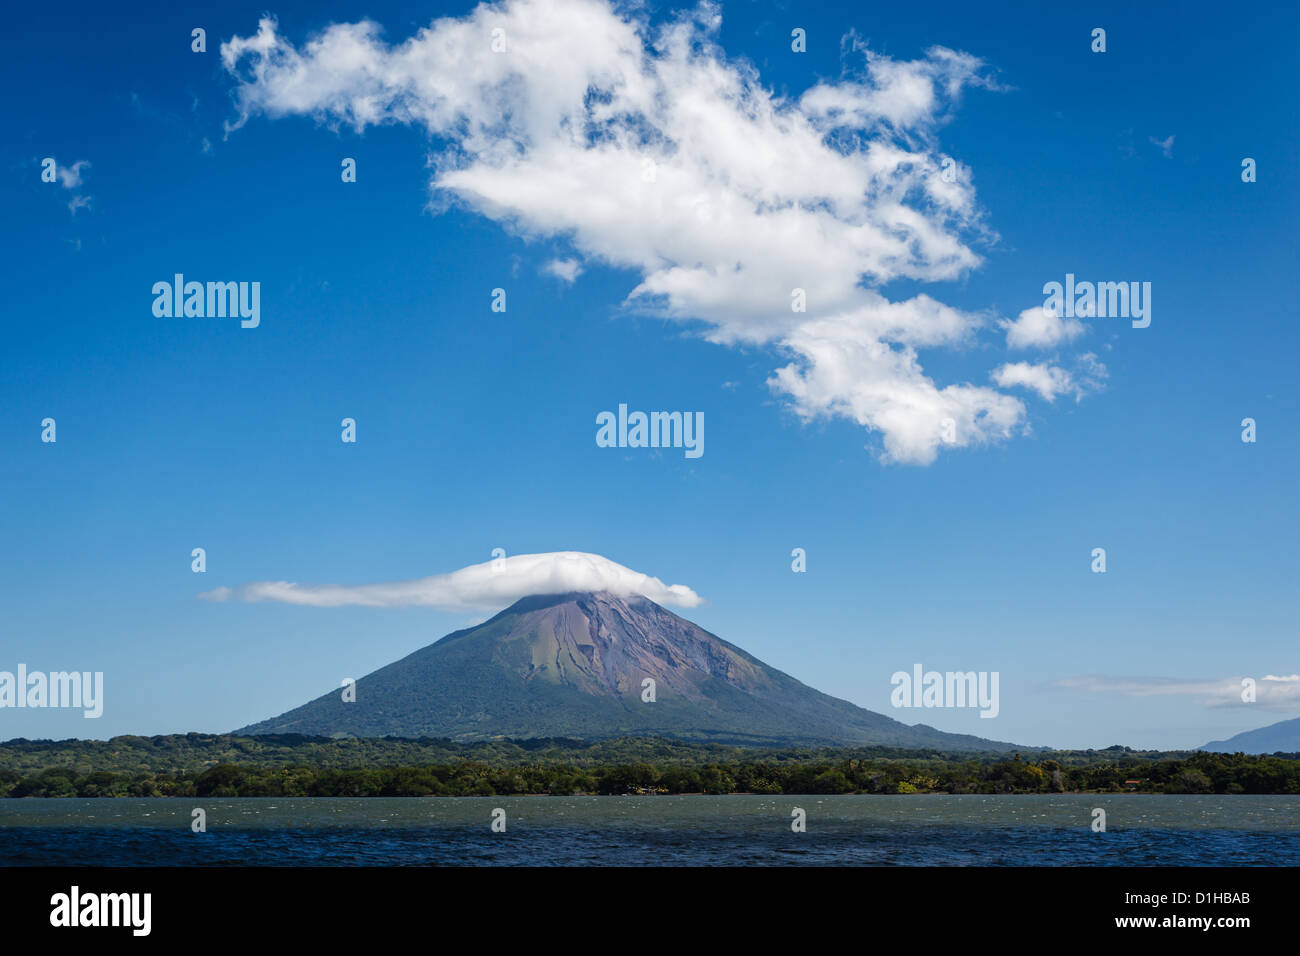 Approaching volcano Conception on Ometepe Island, Nicaragua from the sea. Stock Photo